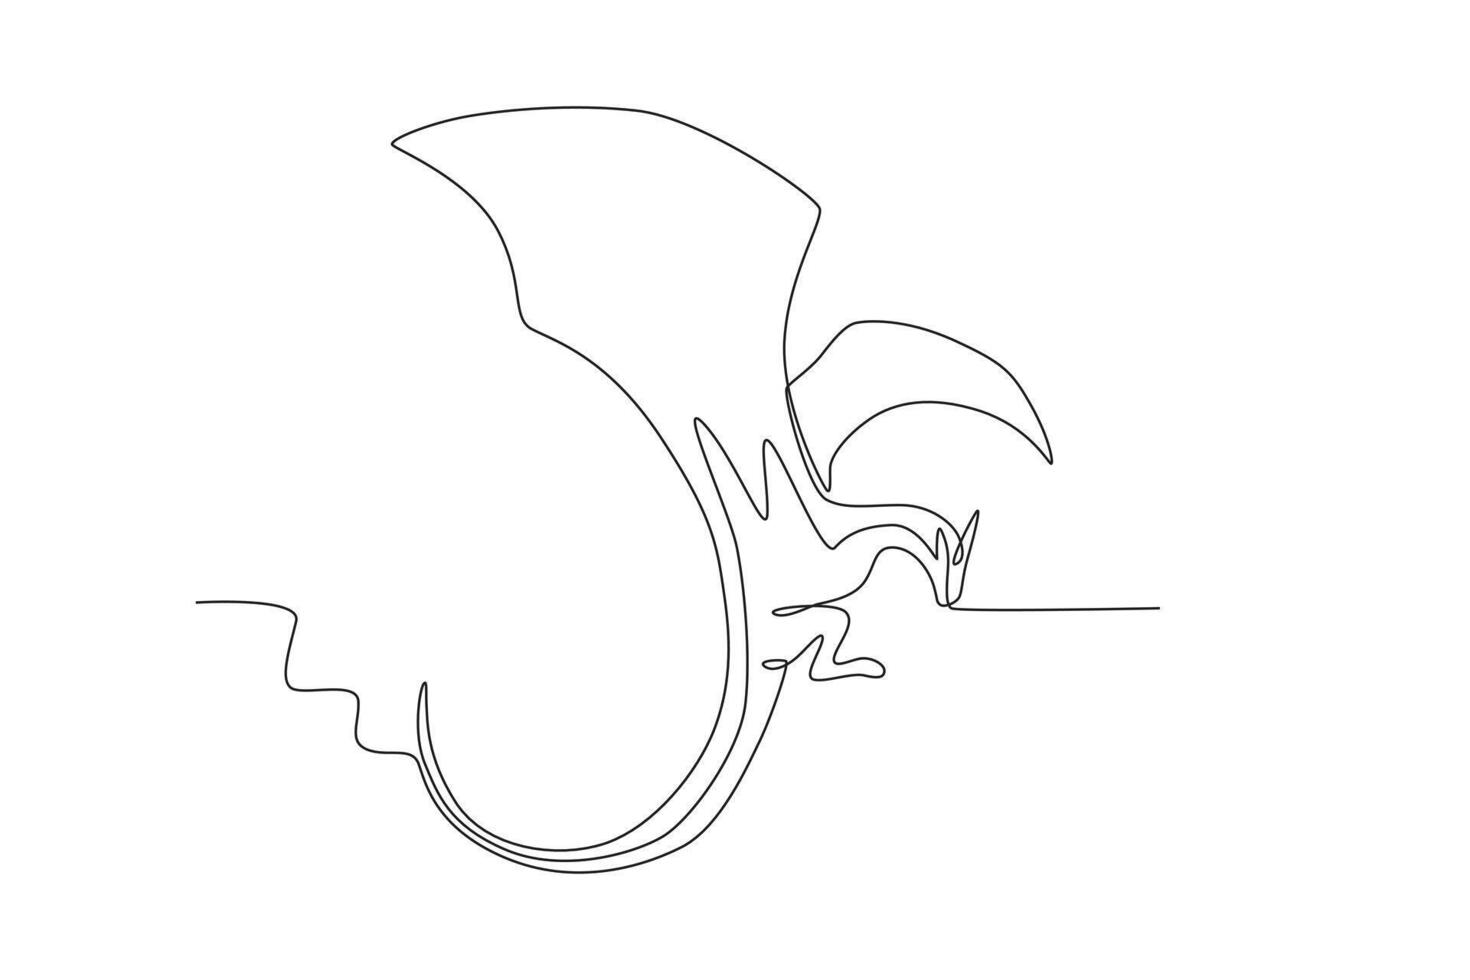 This dragon has a poisonous breath vector